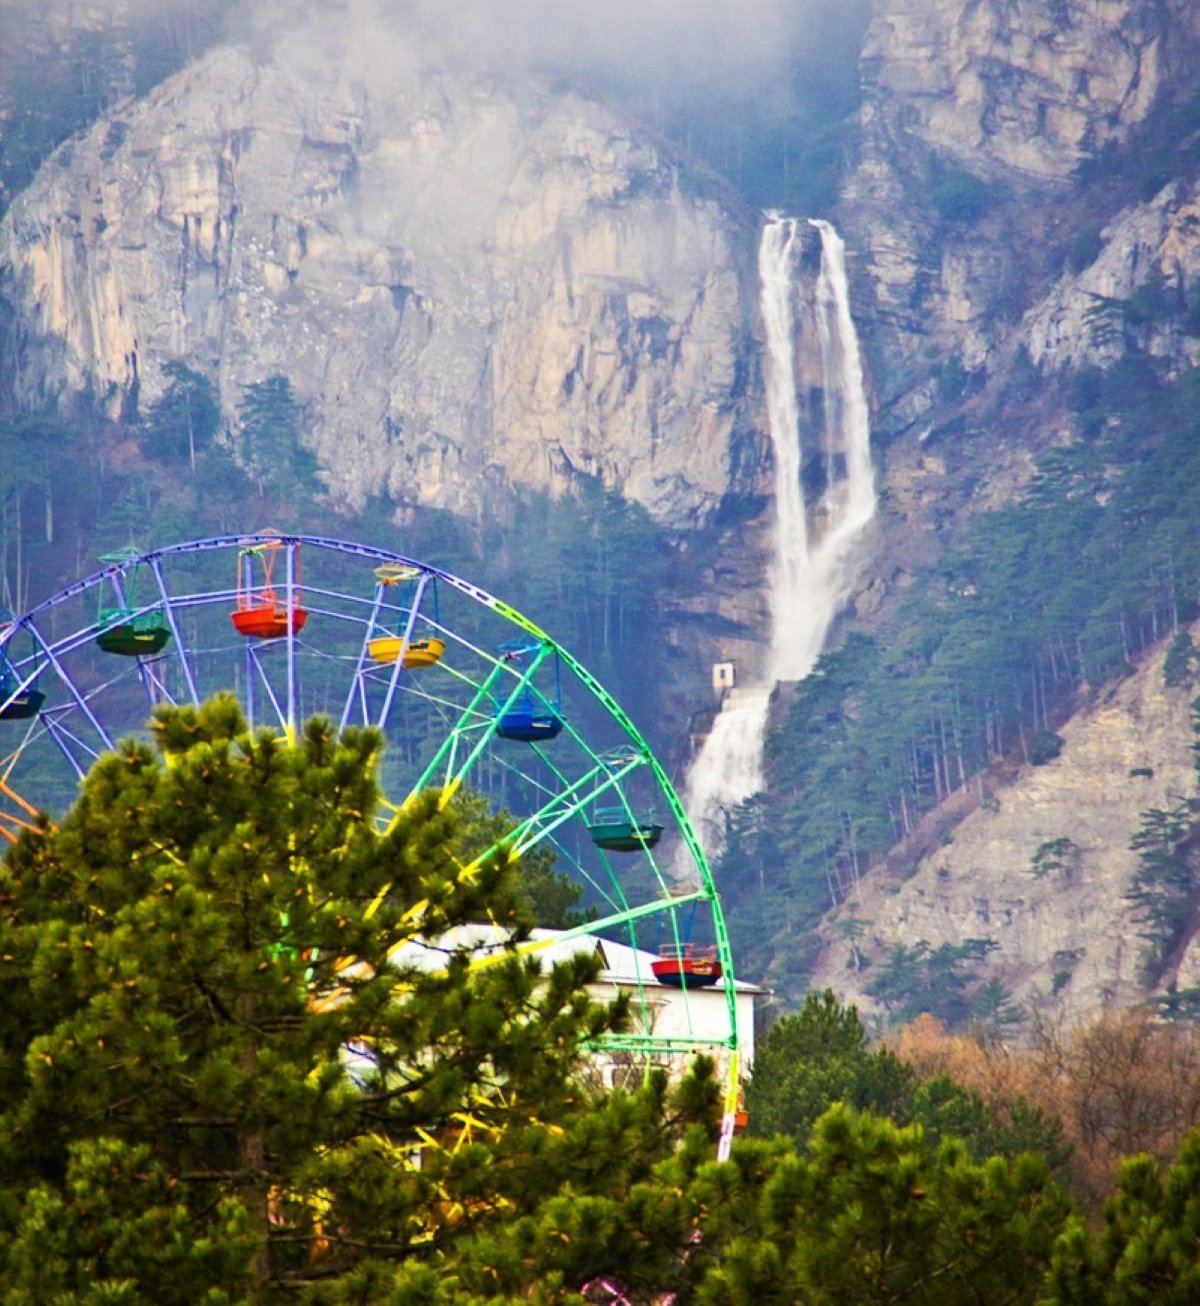 View of the waterfall and ferris wheel in Yalta